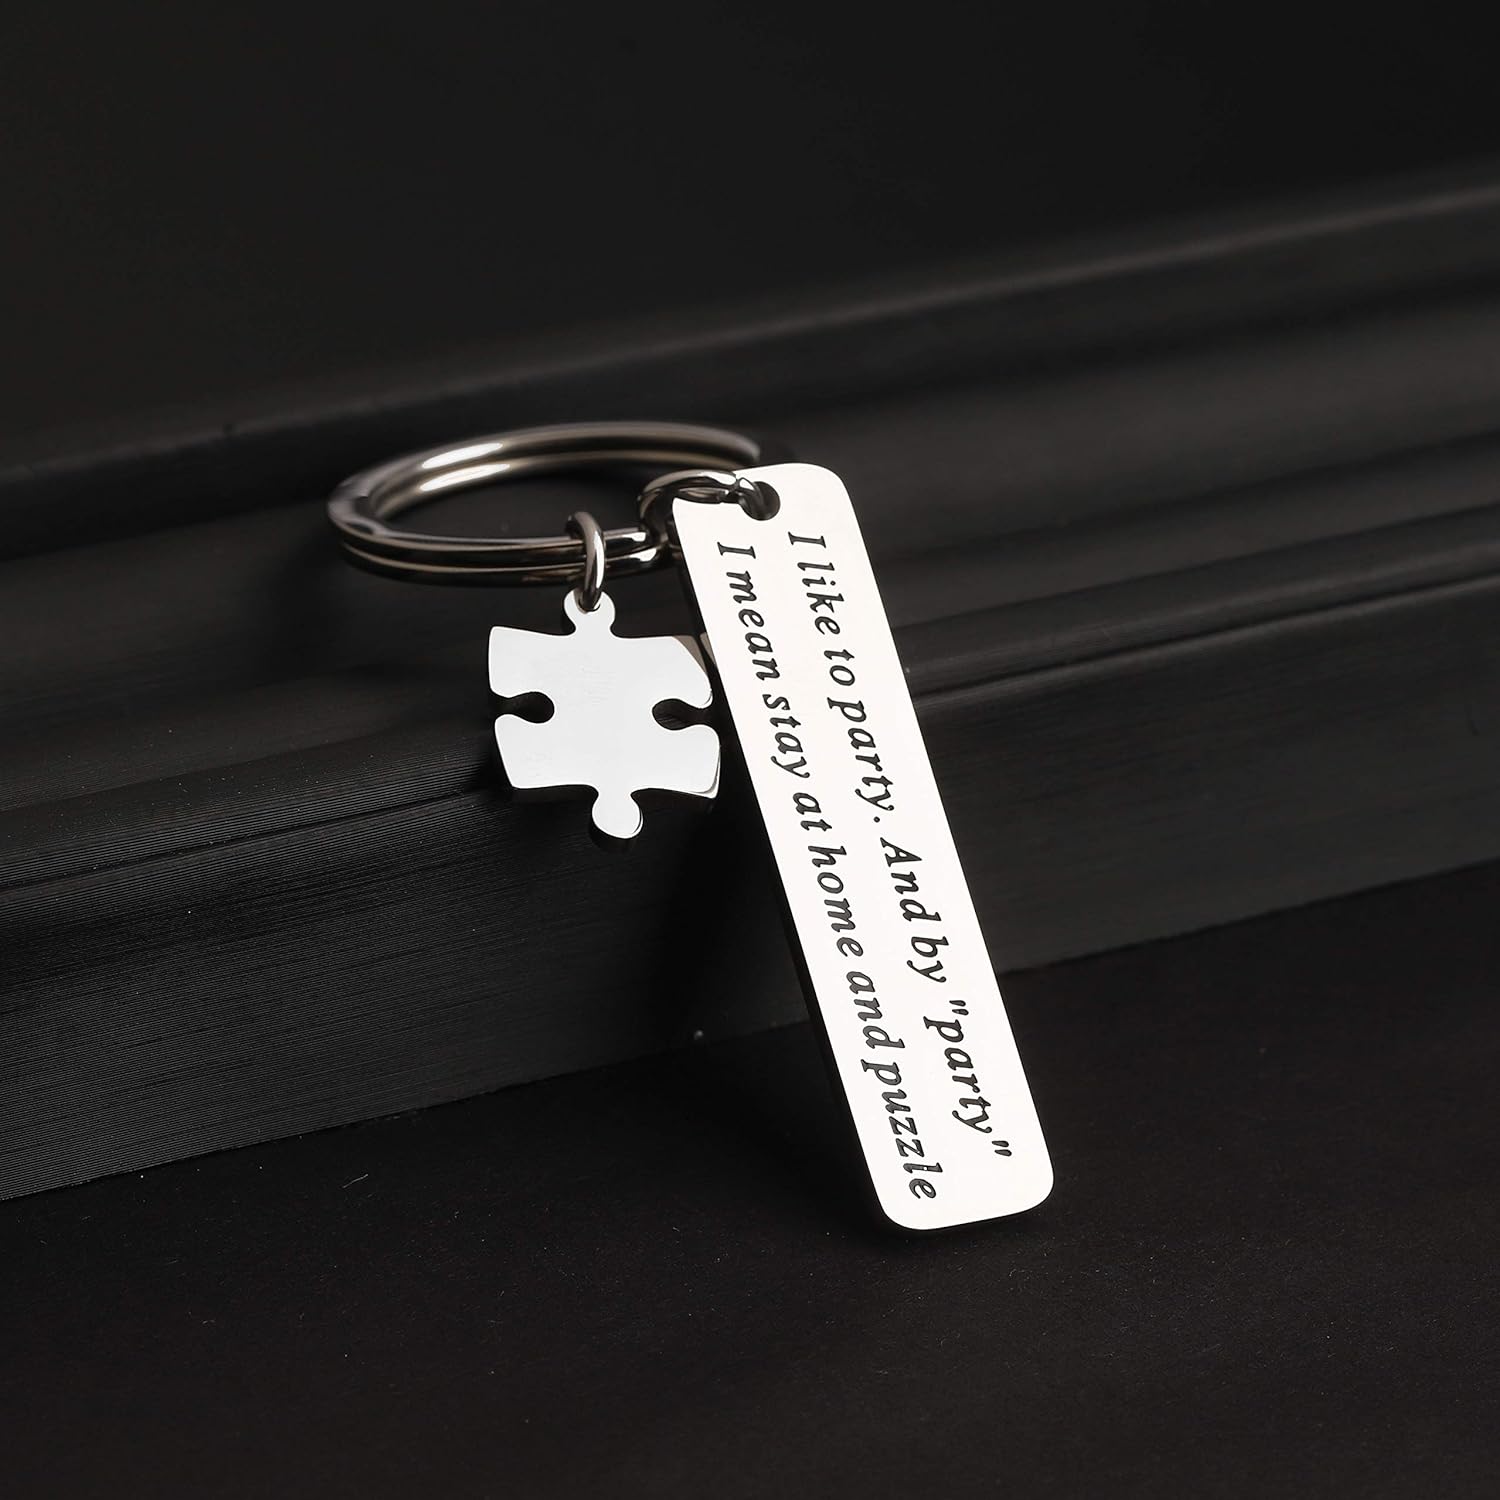 Key Ring Charm for Puzzle Geeks